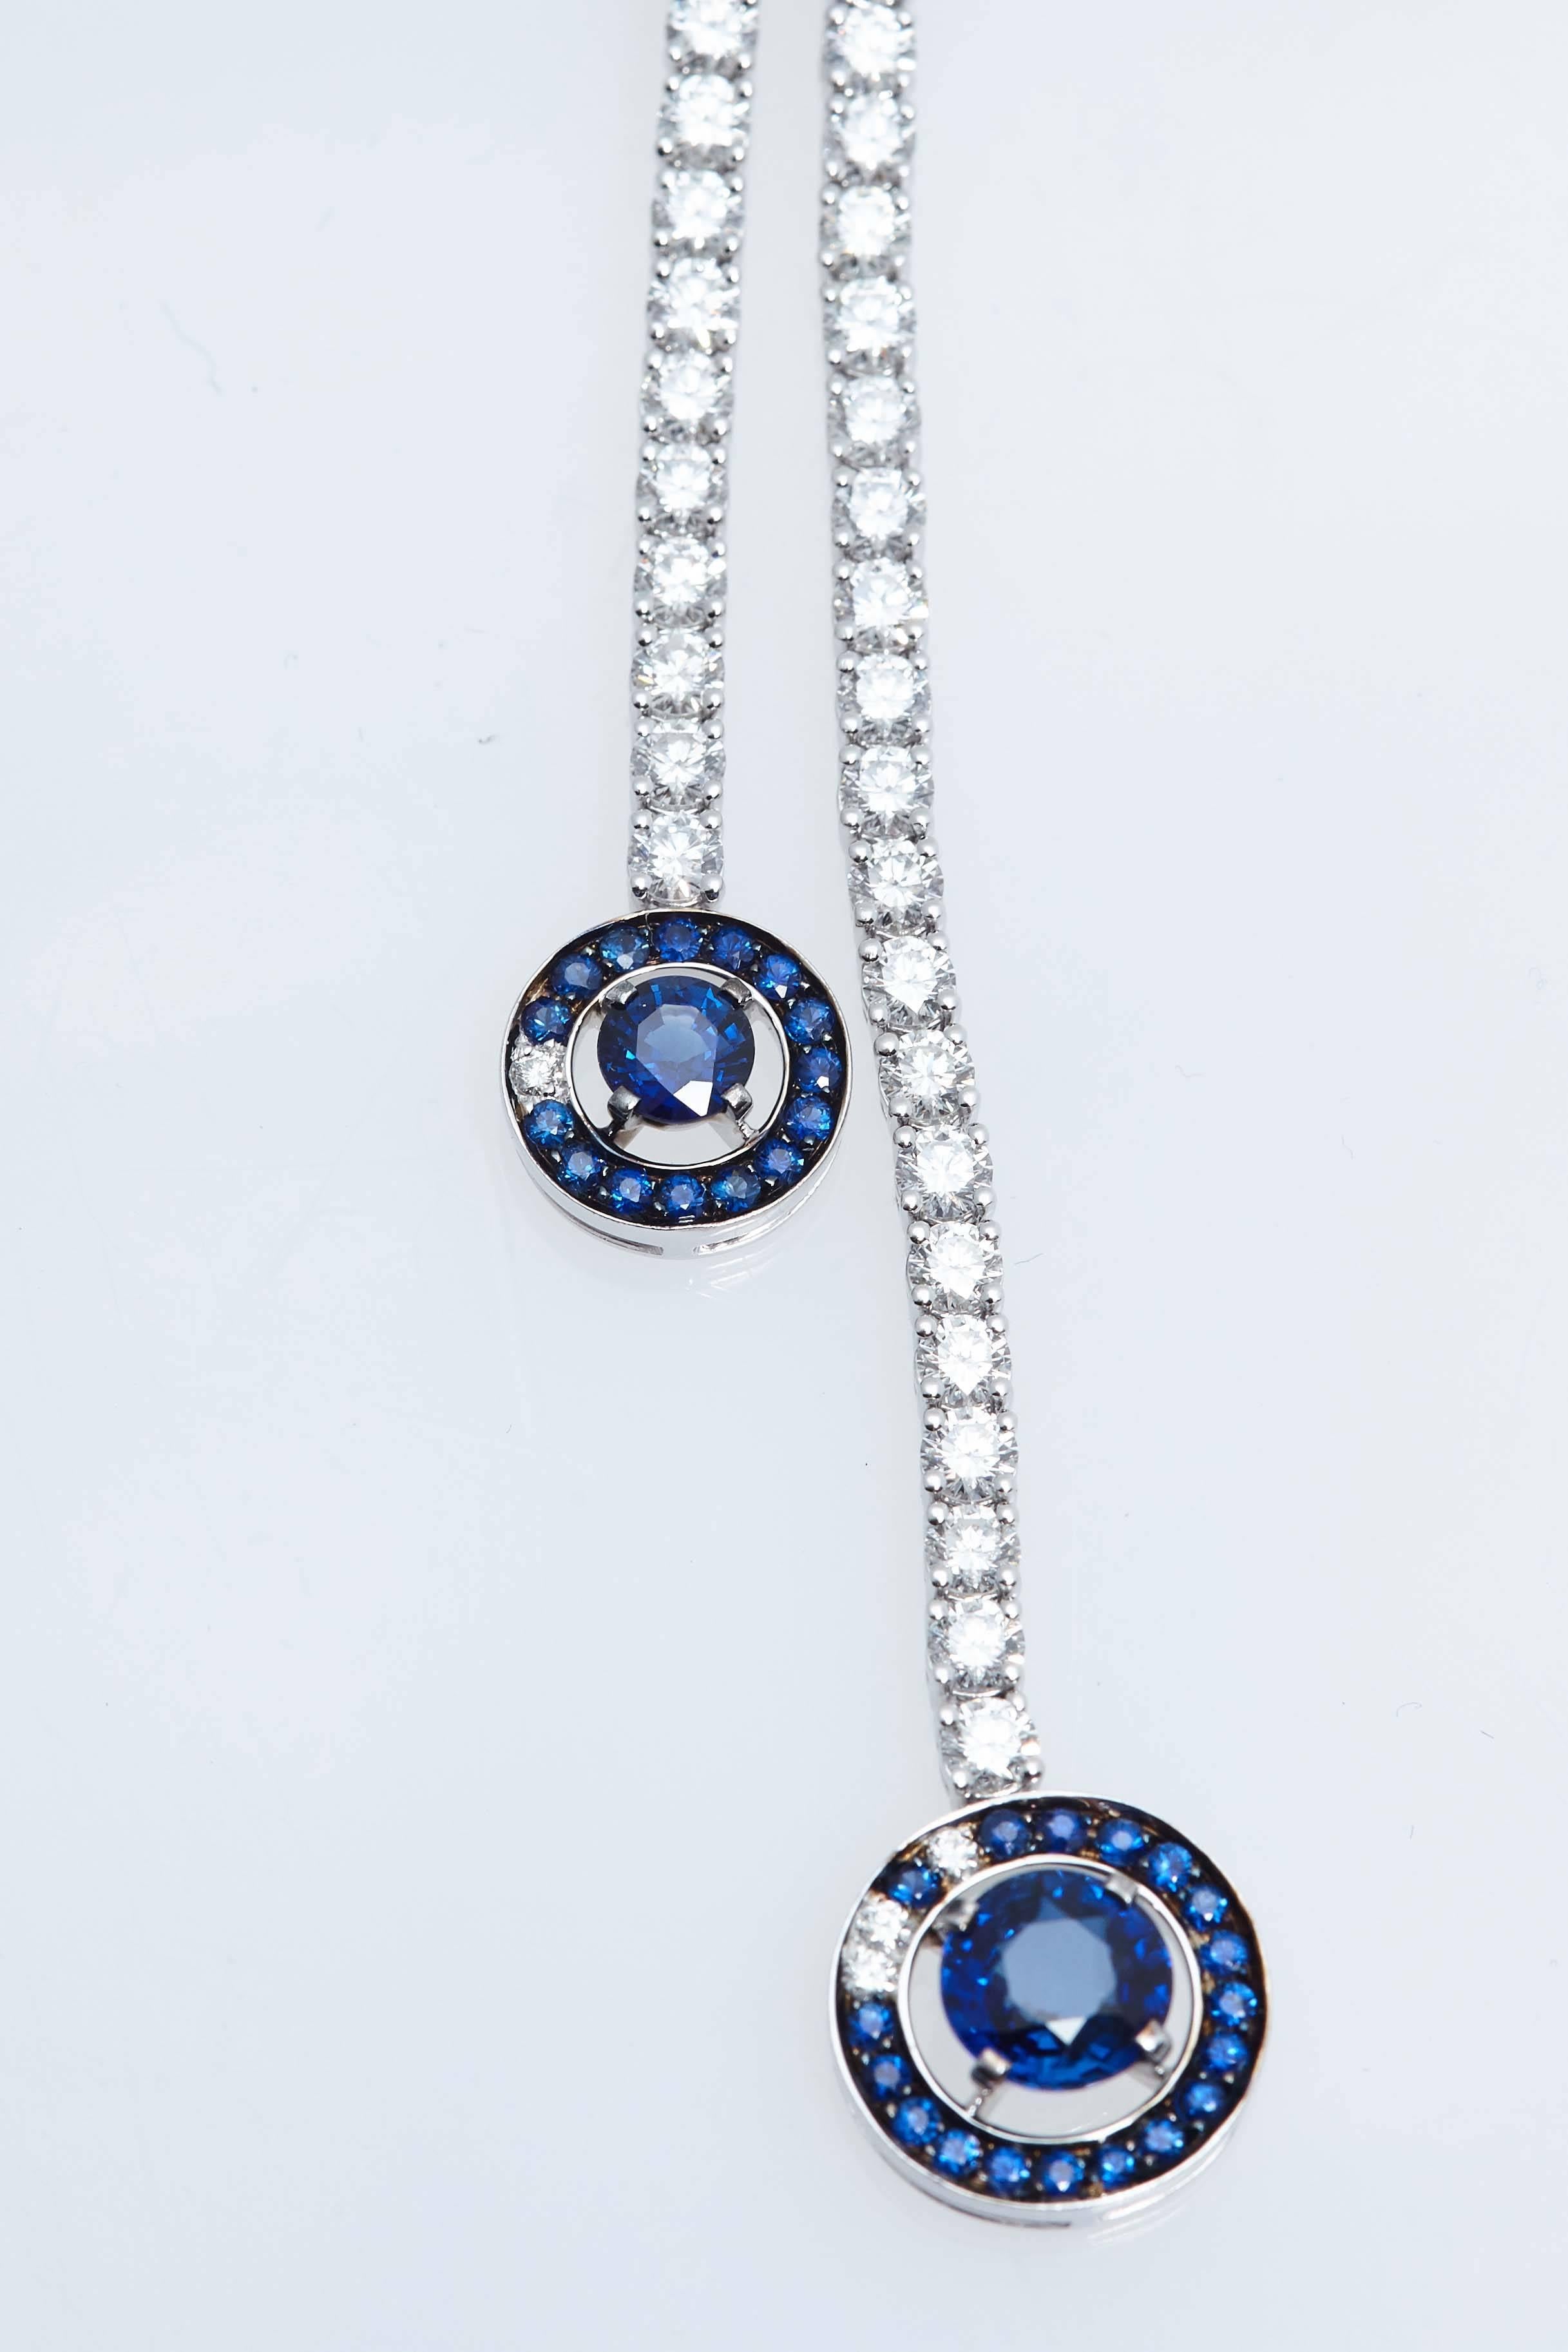 Boucheron diamond lavalier eighteen karat white gold necklace composed of round diamonds ending in two graduated sapphire pendants composed of a center sapphire stone surrounded by a ring of sapphires.  The neck portion measures 14 1/2 inches to the